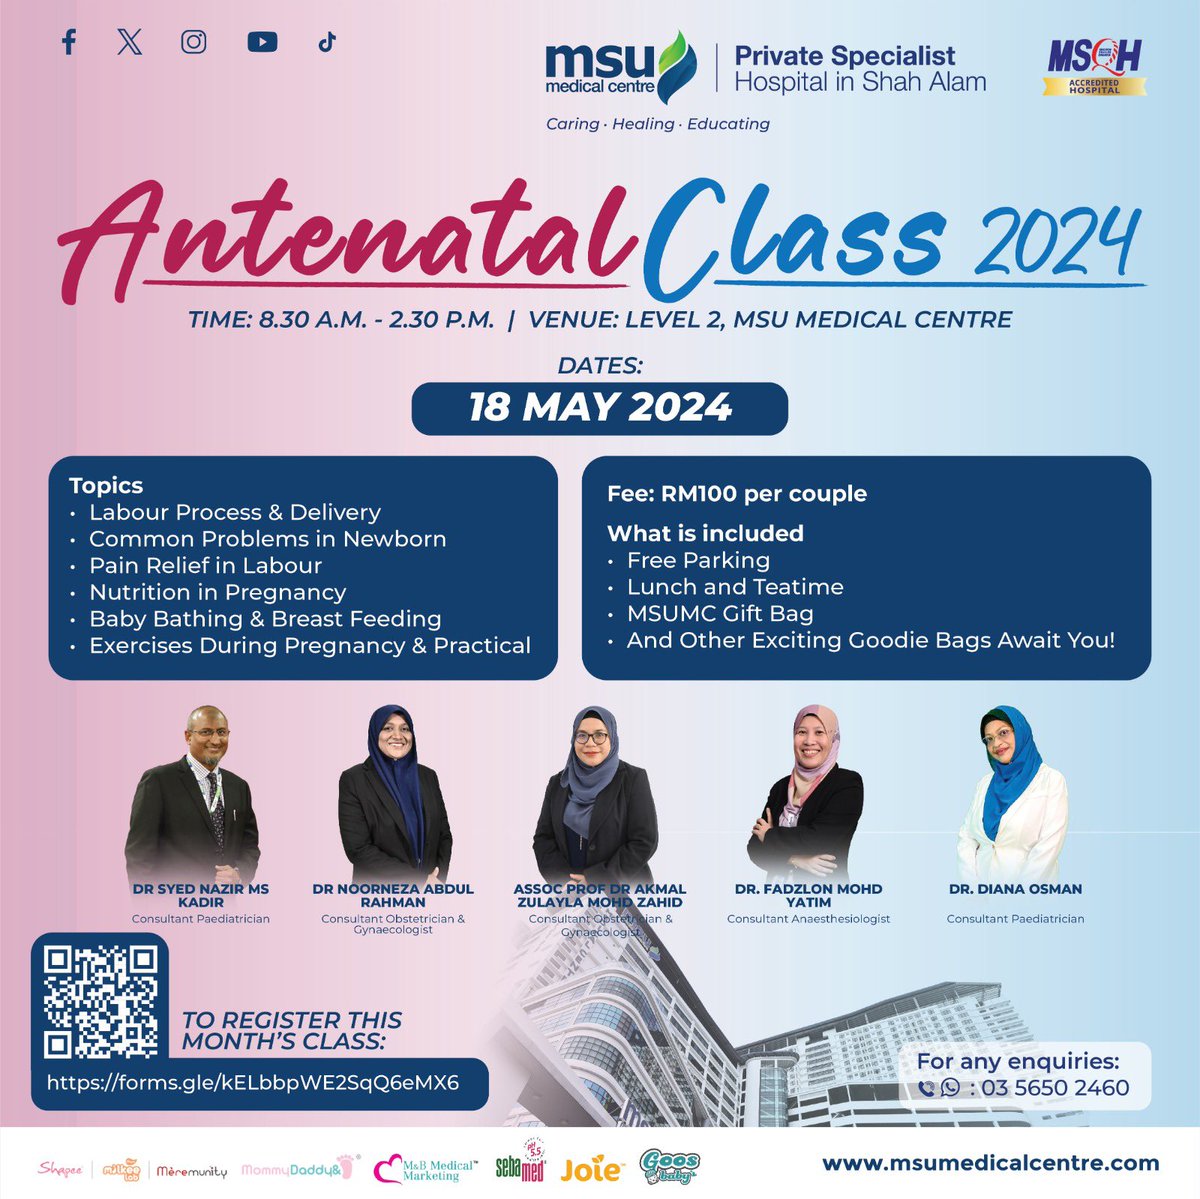 Registration for 2nd antenatal class for May’s is now open.

Enroll immediately!
Scan the QR code to sign up.

Call us at 03-55262600, or visit our website at msumedicalcentre.com.

#CaringHealingEducating
#MSUMC
#antenatalclass